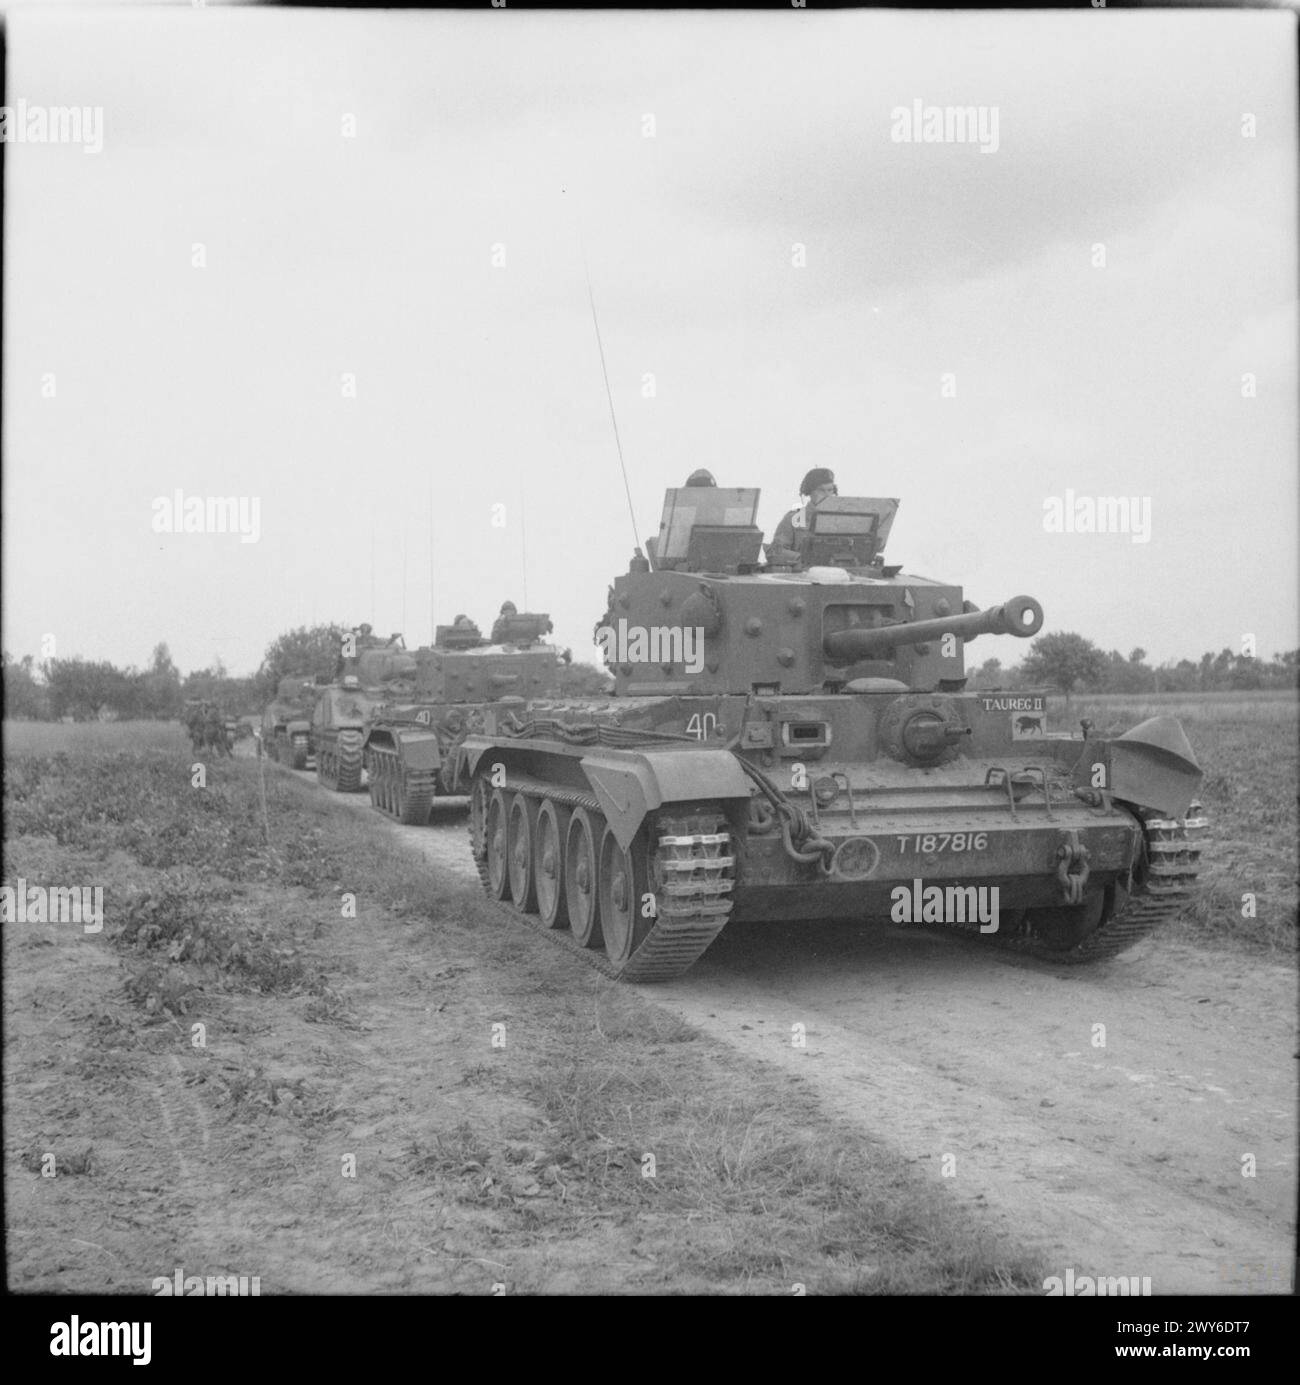 THE BRITISH ARMY IN THE NORMANDY CAMPAIGN 1944 - A Cromwell command tank, named 'Taureg II', of 11th Armoured Division HQ leads a Centaur OP tank with dummy gun and two Shermans during Operation 'Epsom', 26 June 1944. , Stock Photo